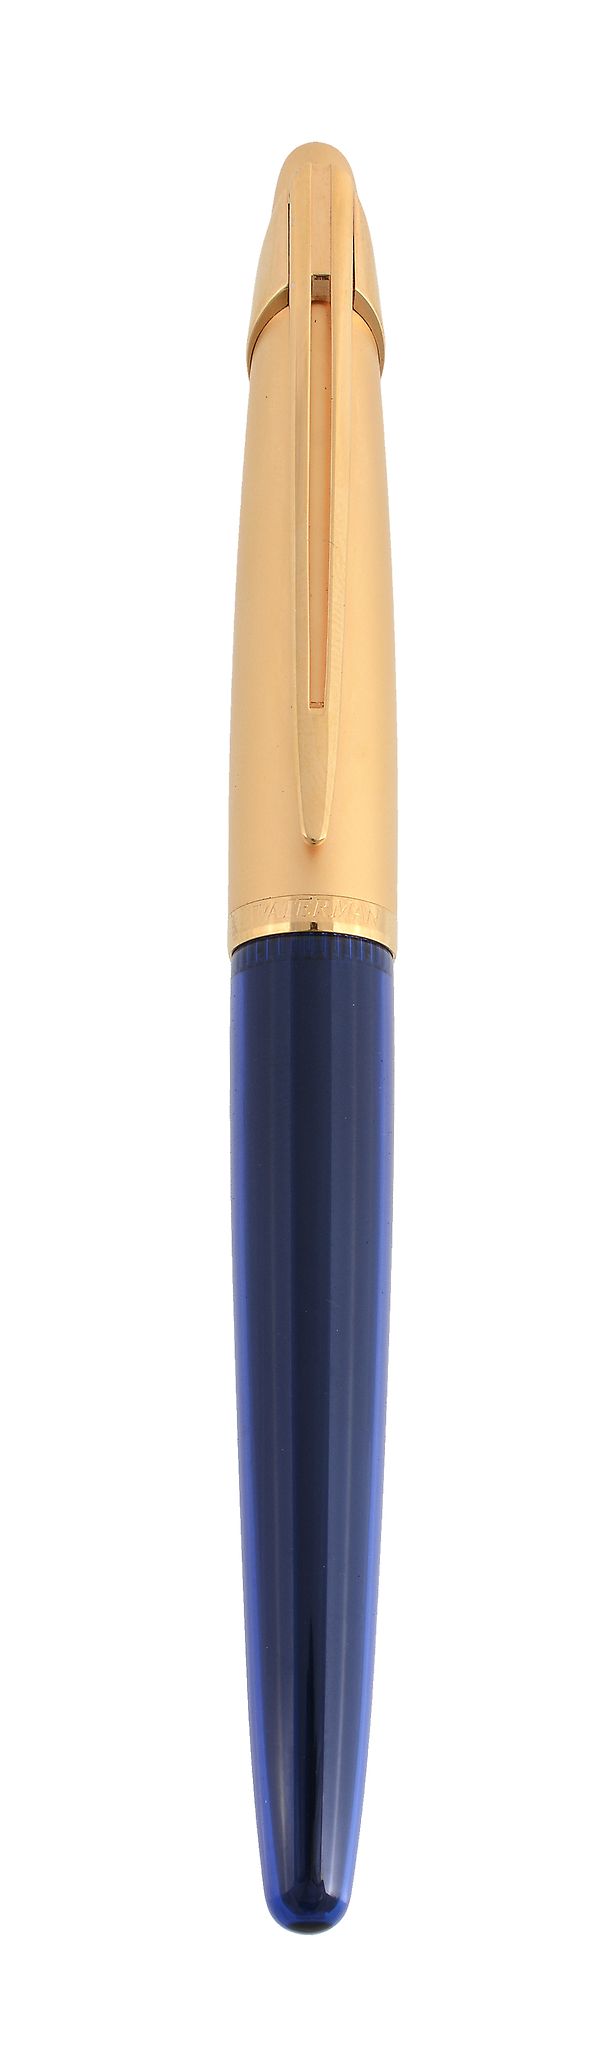 Waterman Edison fountain pen, with blue resin barrel and gilt metal cap  Waterman Edison fountain - Image 2 of 3